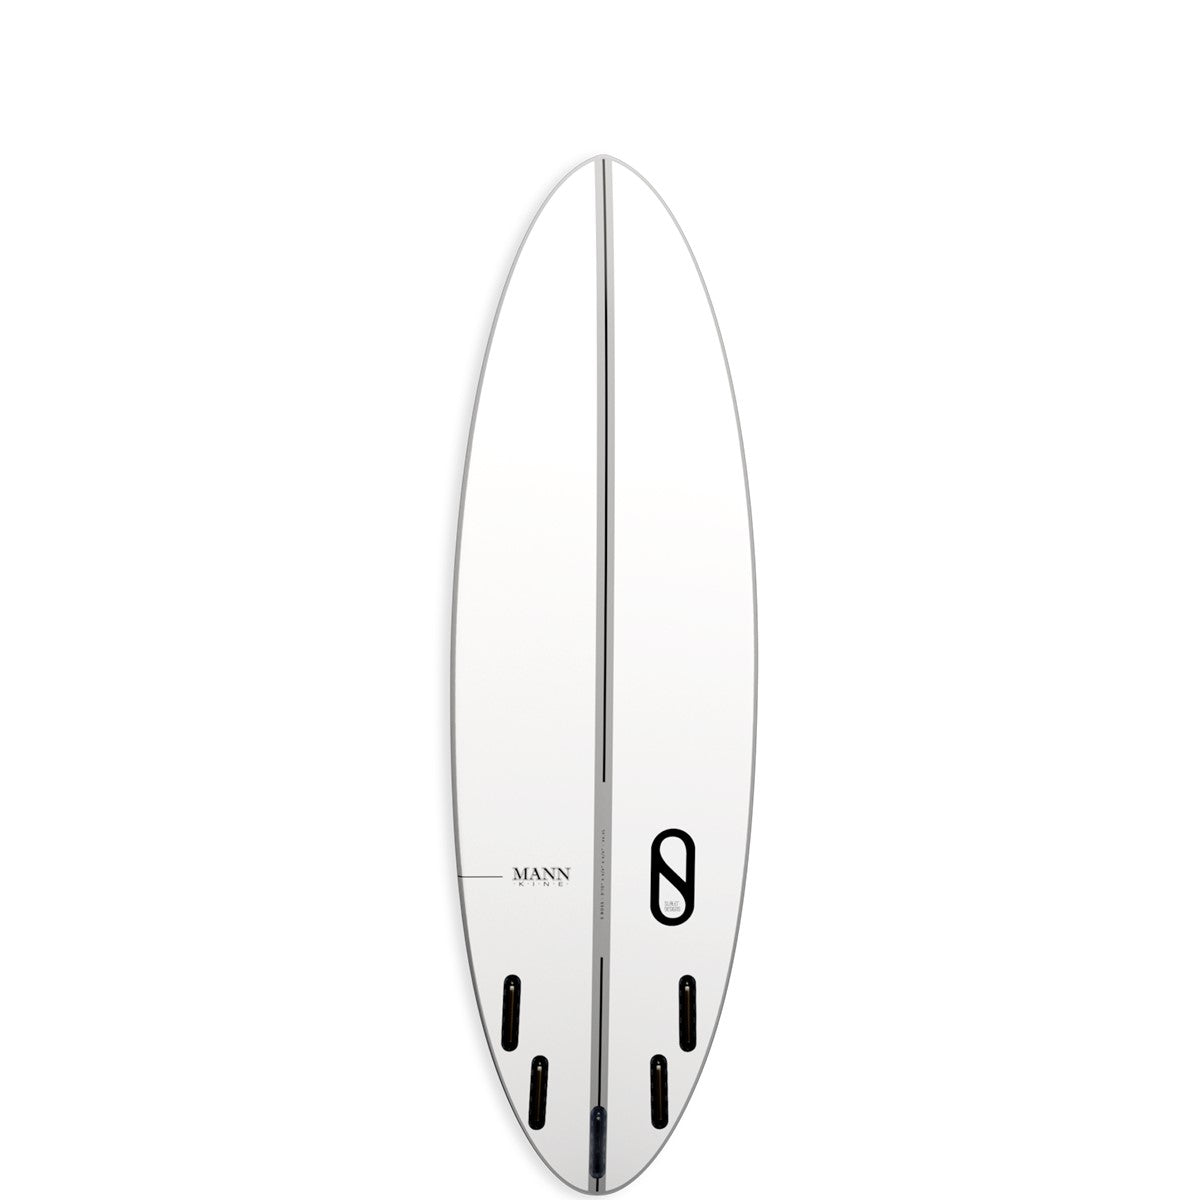 Slater Designs Ibolic S Boss by Kelly Slater and Dan Mann